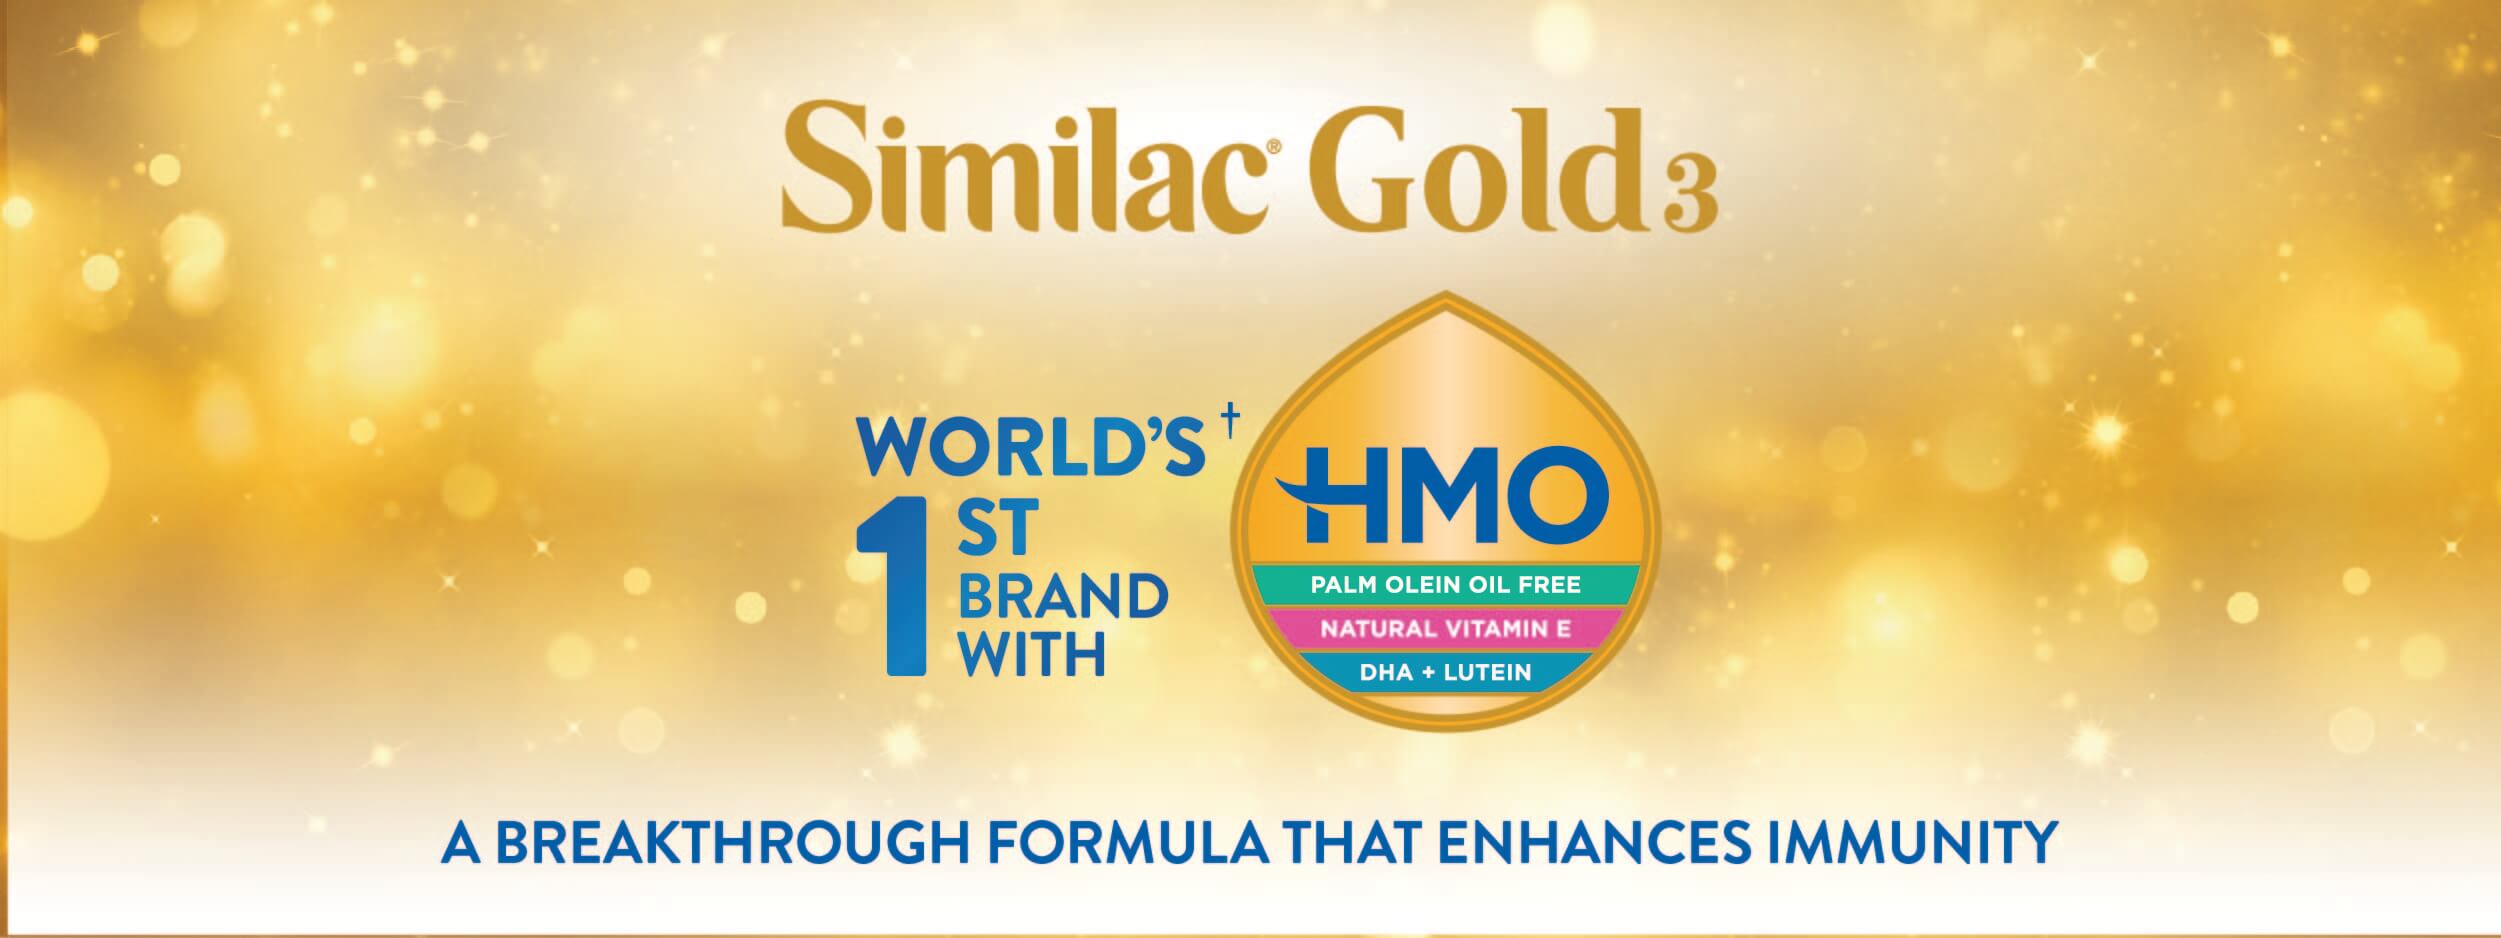 Similac Logo - SimiMama | Educating Mothers About Pregnancy, Baby Milk & More